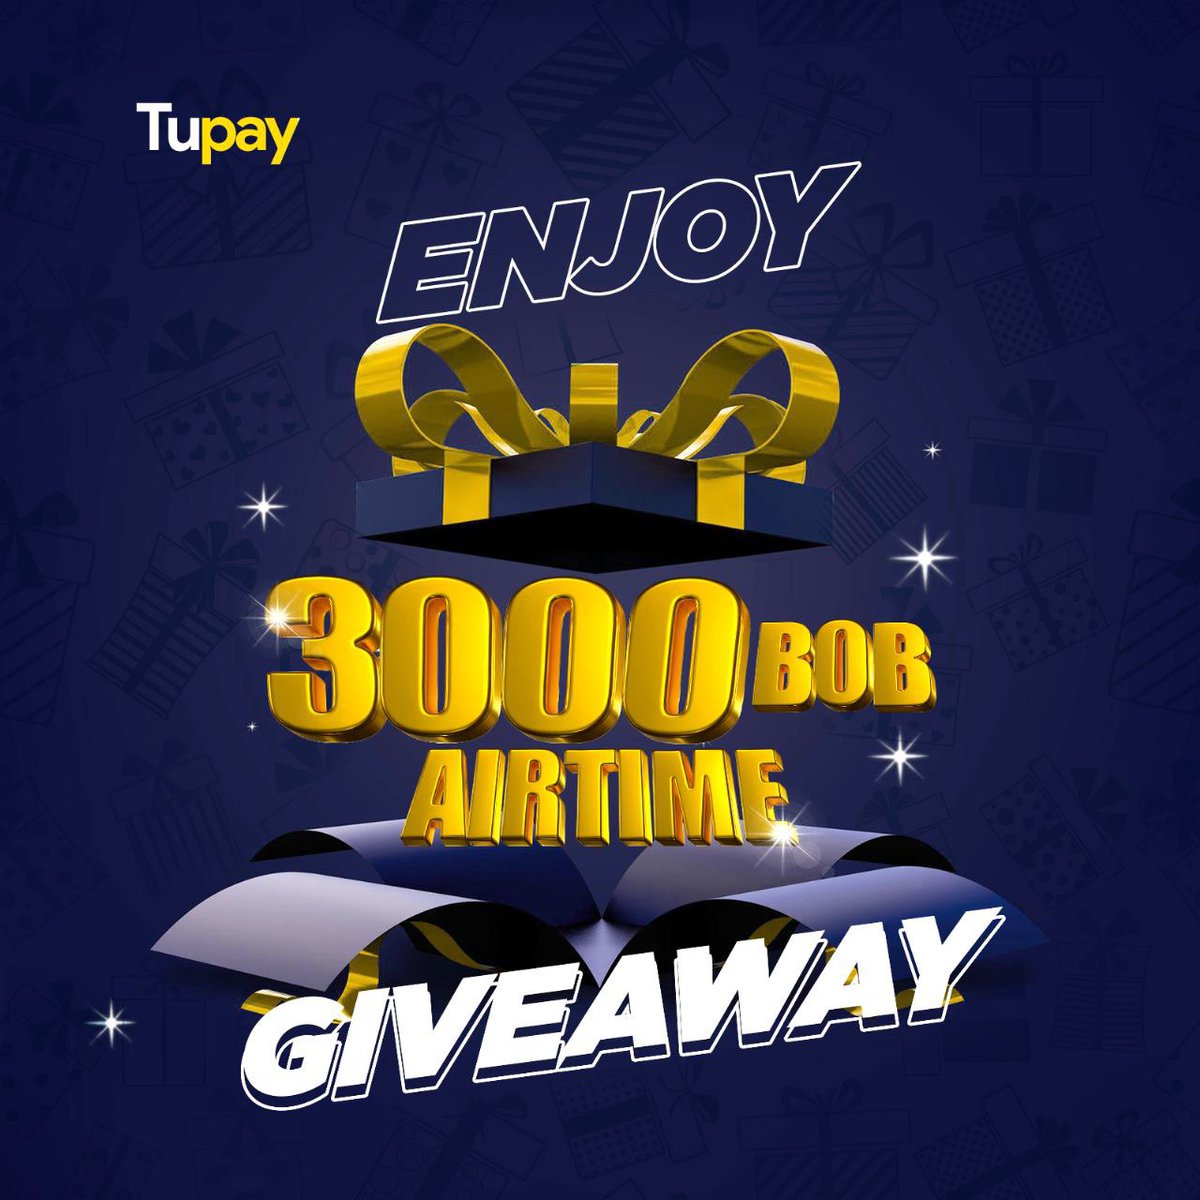 🎉 END MONTH GIVEAWAY ALERT 🎉
Hey Tupay Fam, Don't miss out, join the fun now! Enjoy our KSH 3,000 Airtime Giveaway! this August.💰
 
Check out the thread on how to enter👇